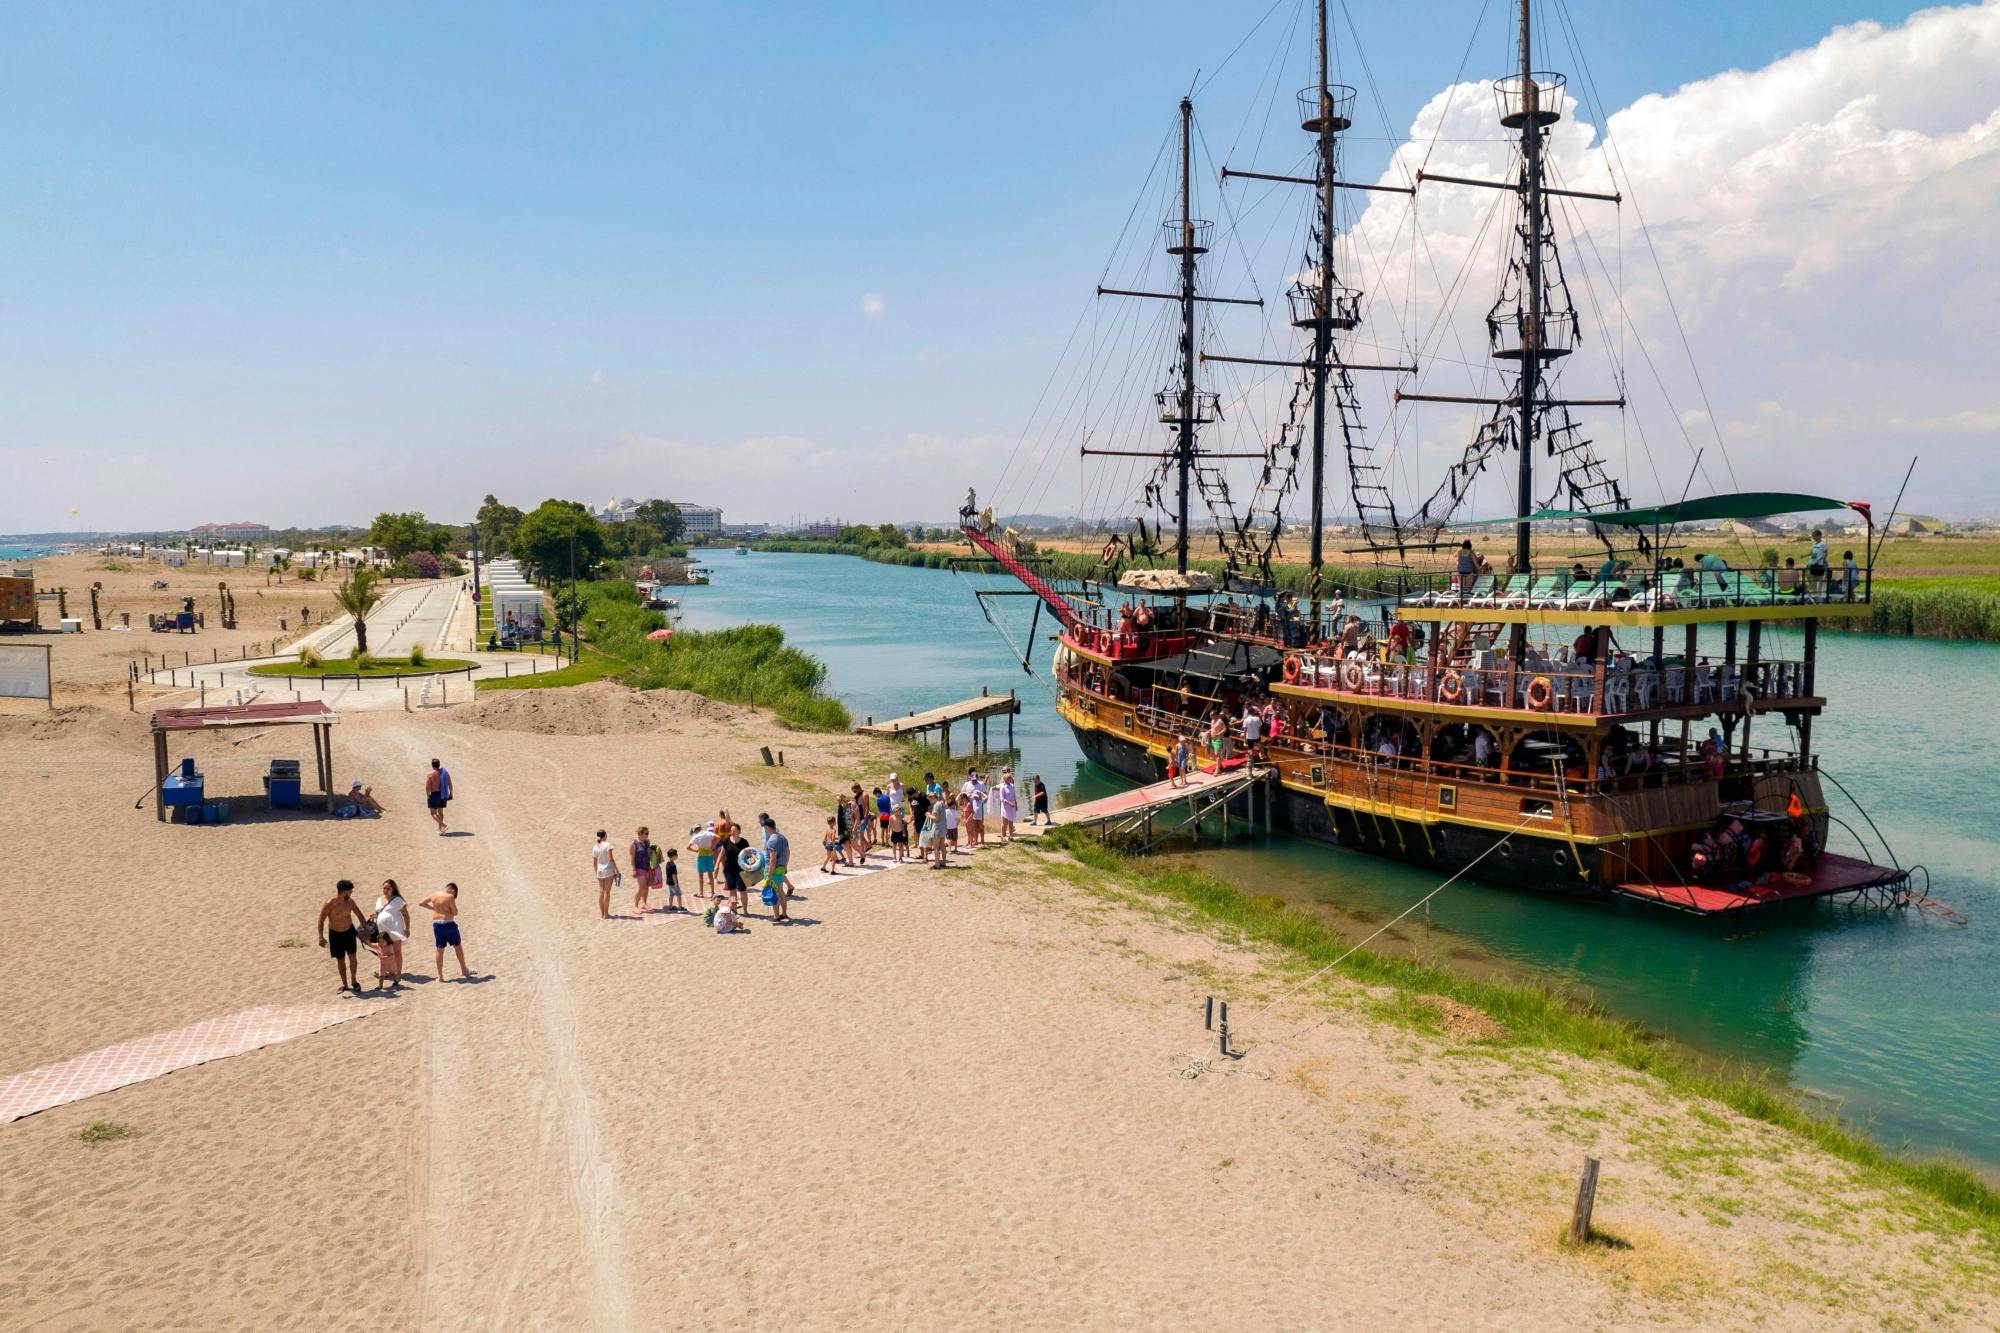 Pirate Boat Cruise from Manavgat